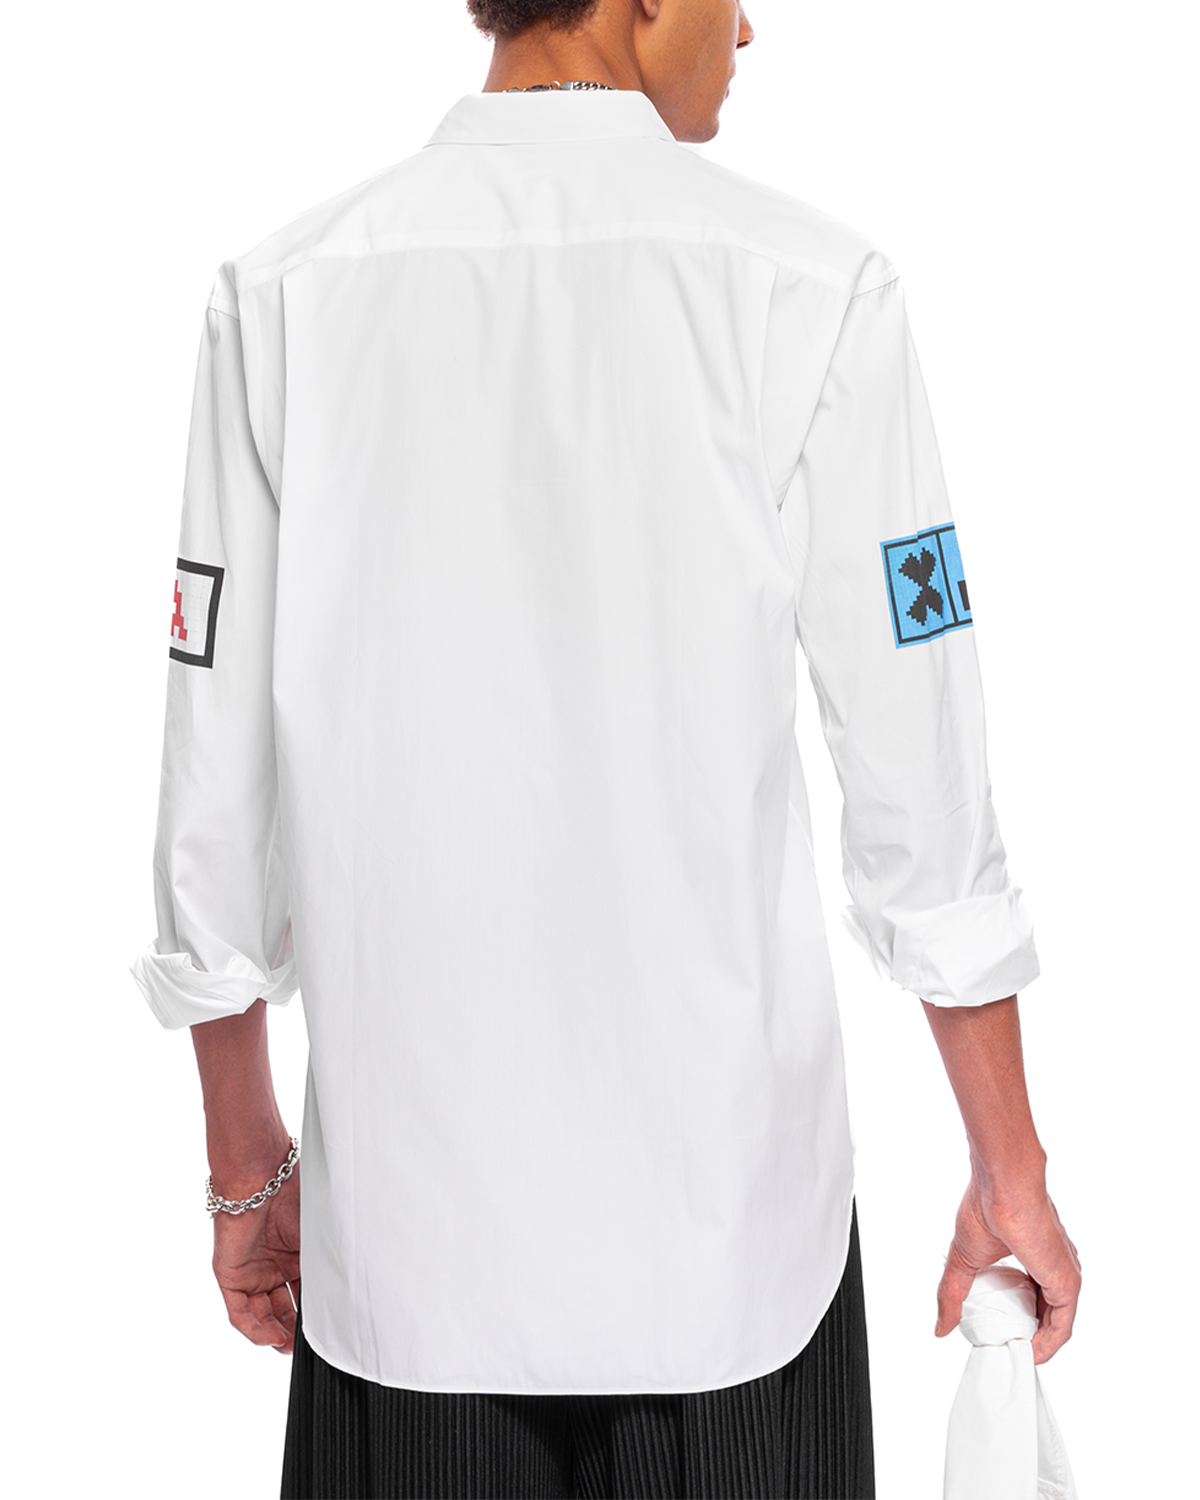 Space Invader Cotton Shirt White